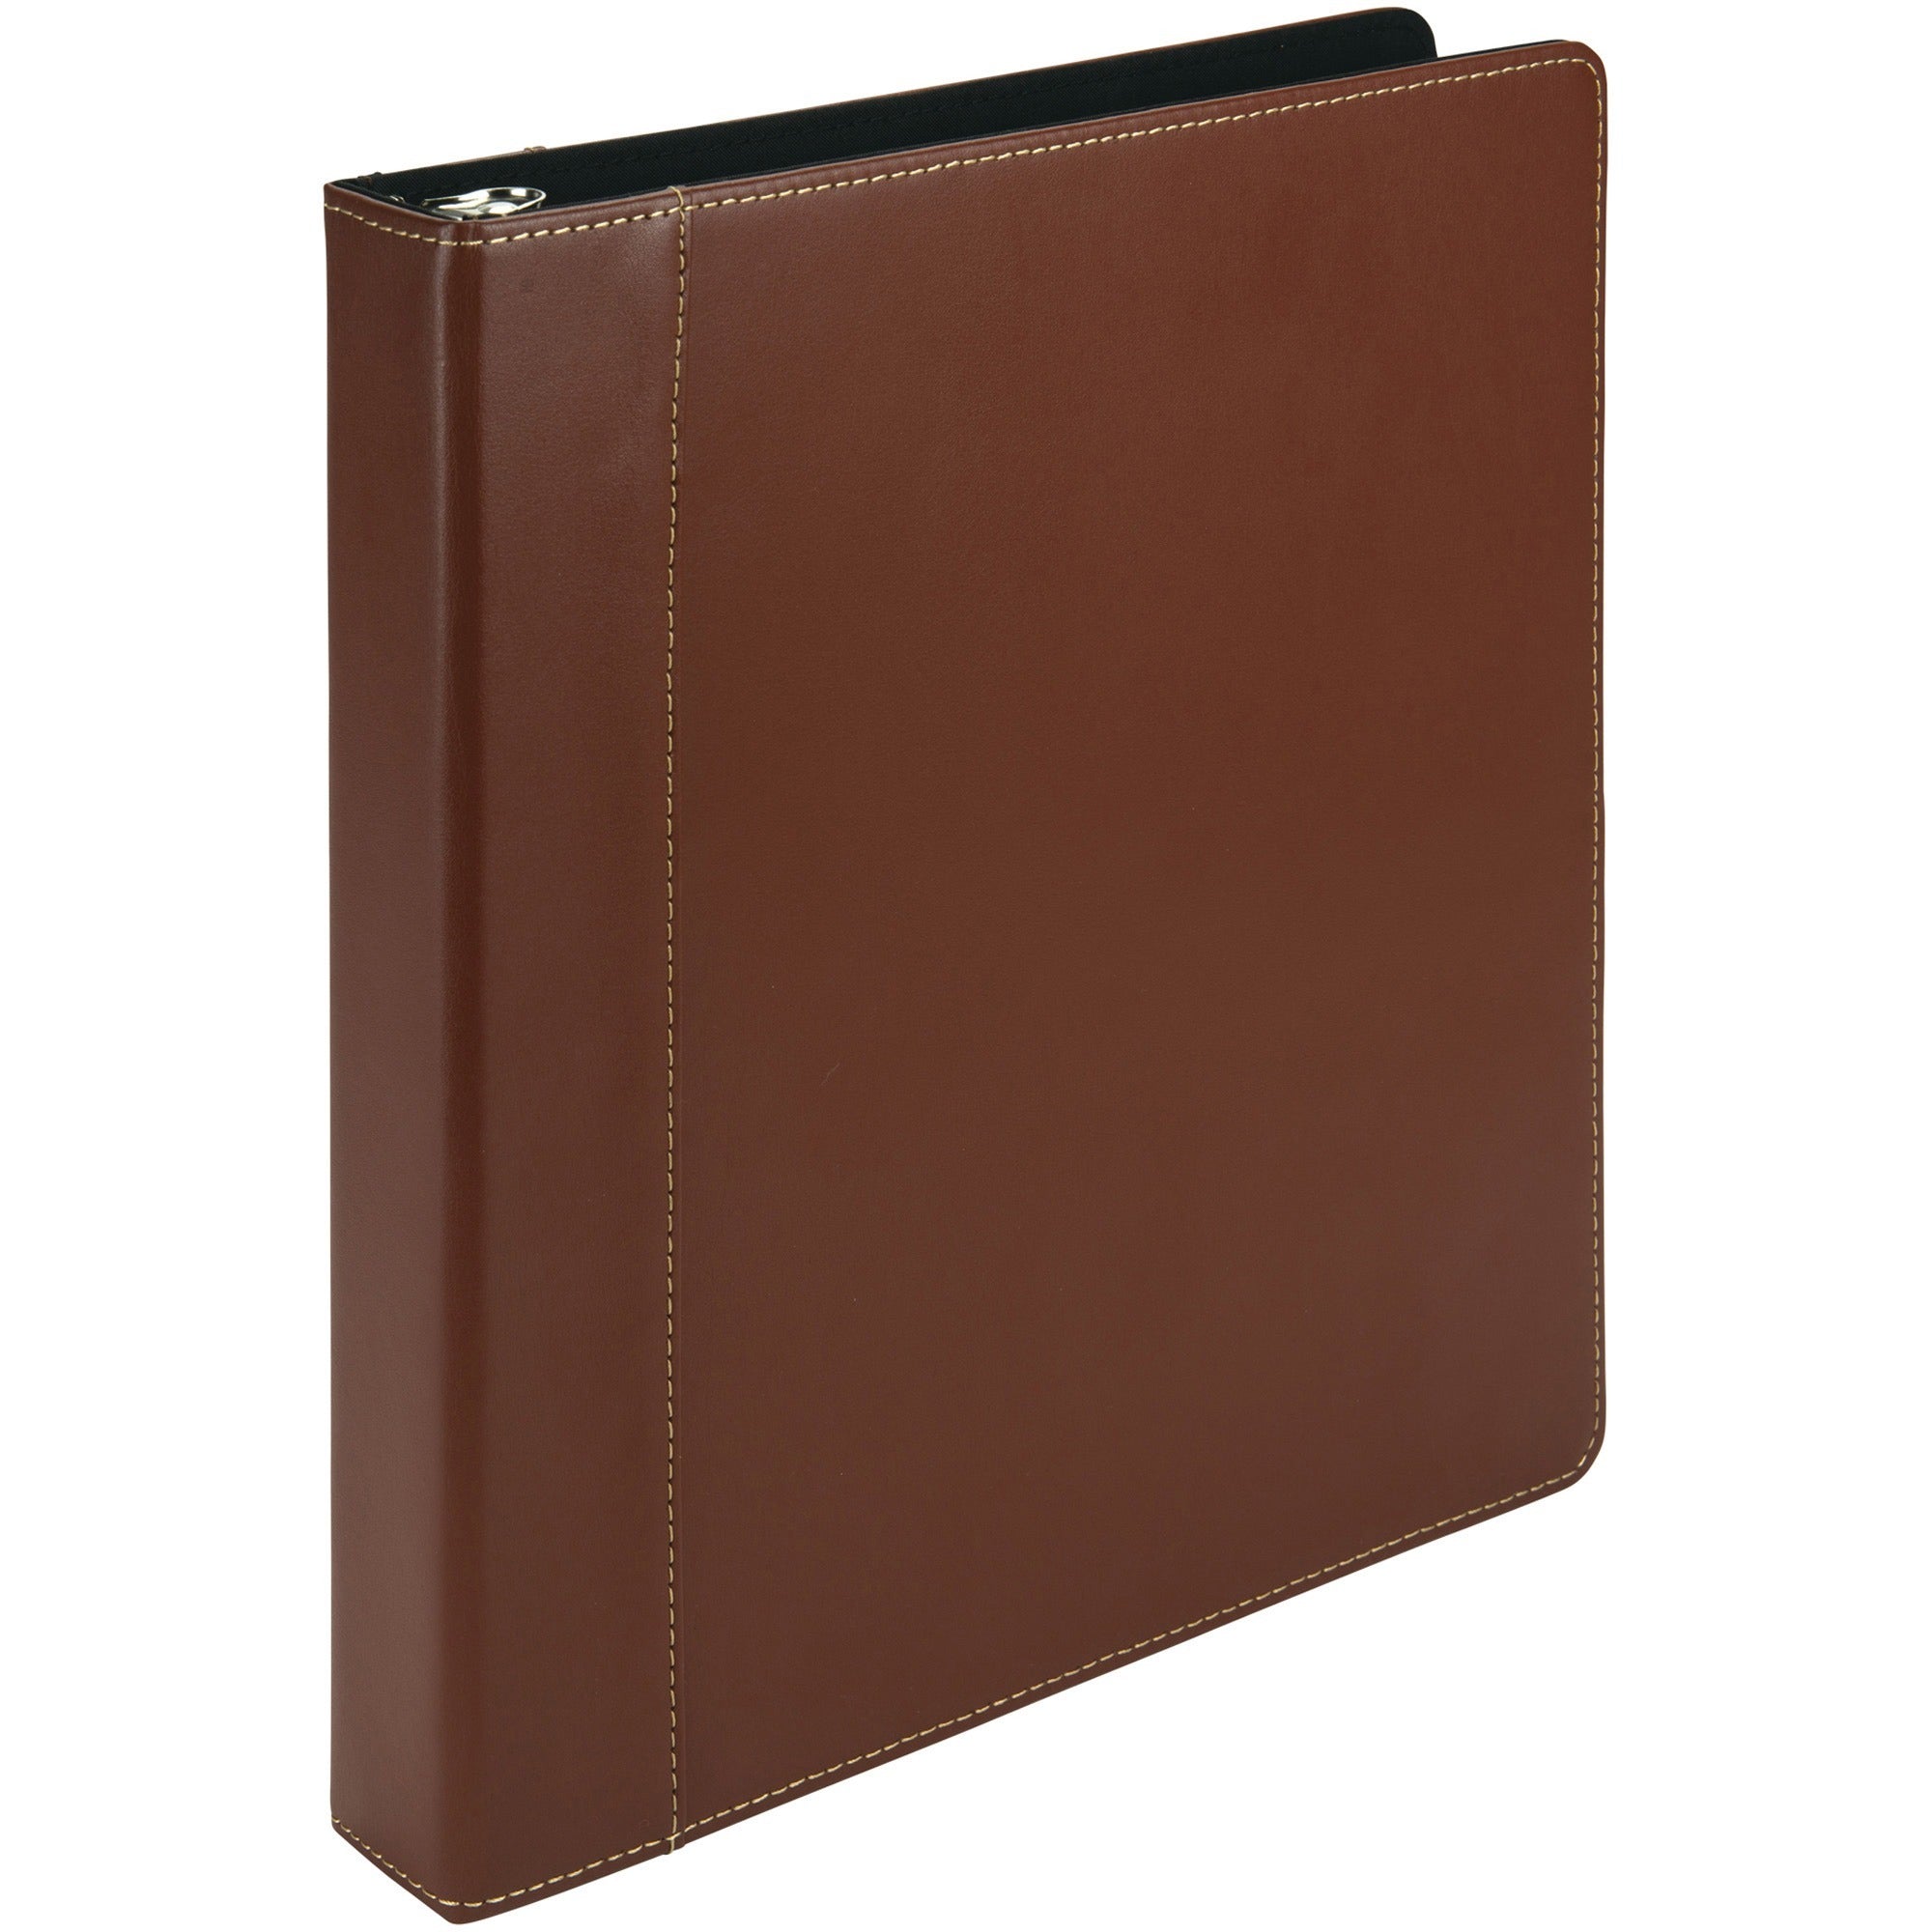 samsill-contrast-stitch-leather-ring-binder-1-binder-capacity-letter-8-1-2-x-11-sheet-size-200-sheet-capacity-1-ring-round-ring-fasteners-2-internal-pockets-bonded-leather-leathergrain-tan-durable-spine-rivet-1-each_sam15712 - 1